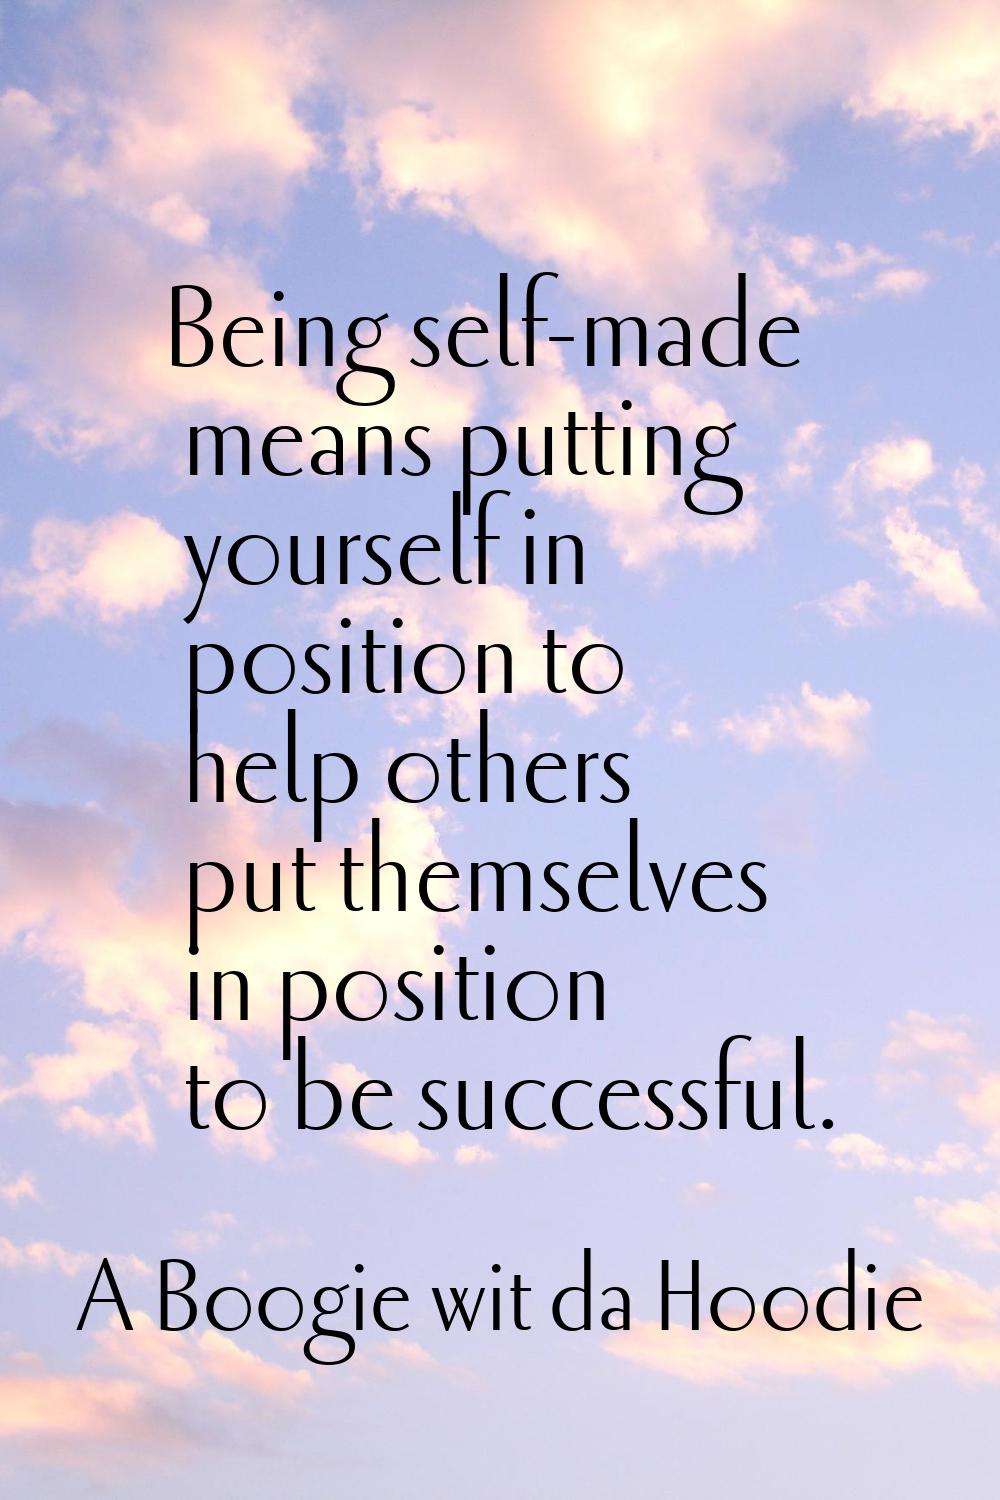 Being self-made means putting yourself in position to help others put themselves in position to be 